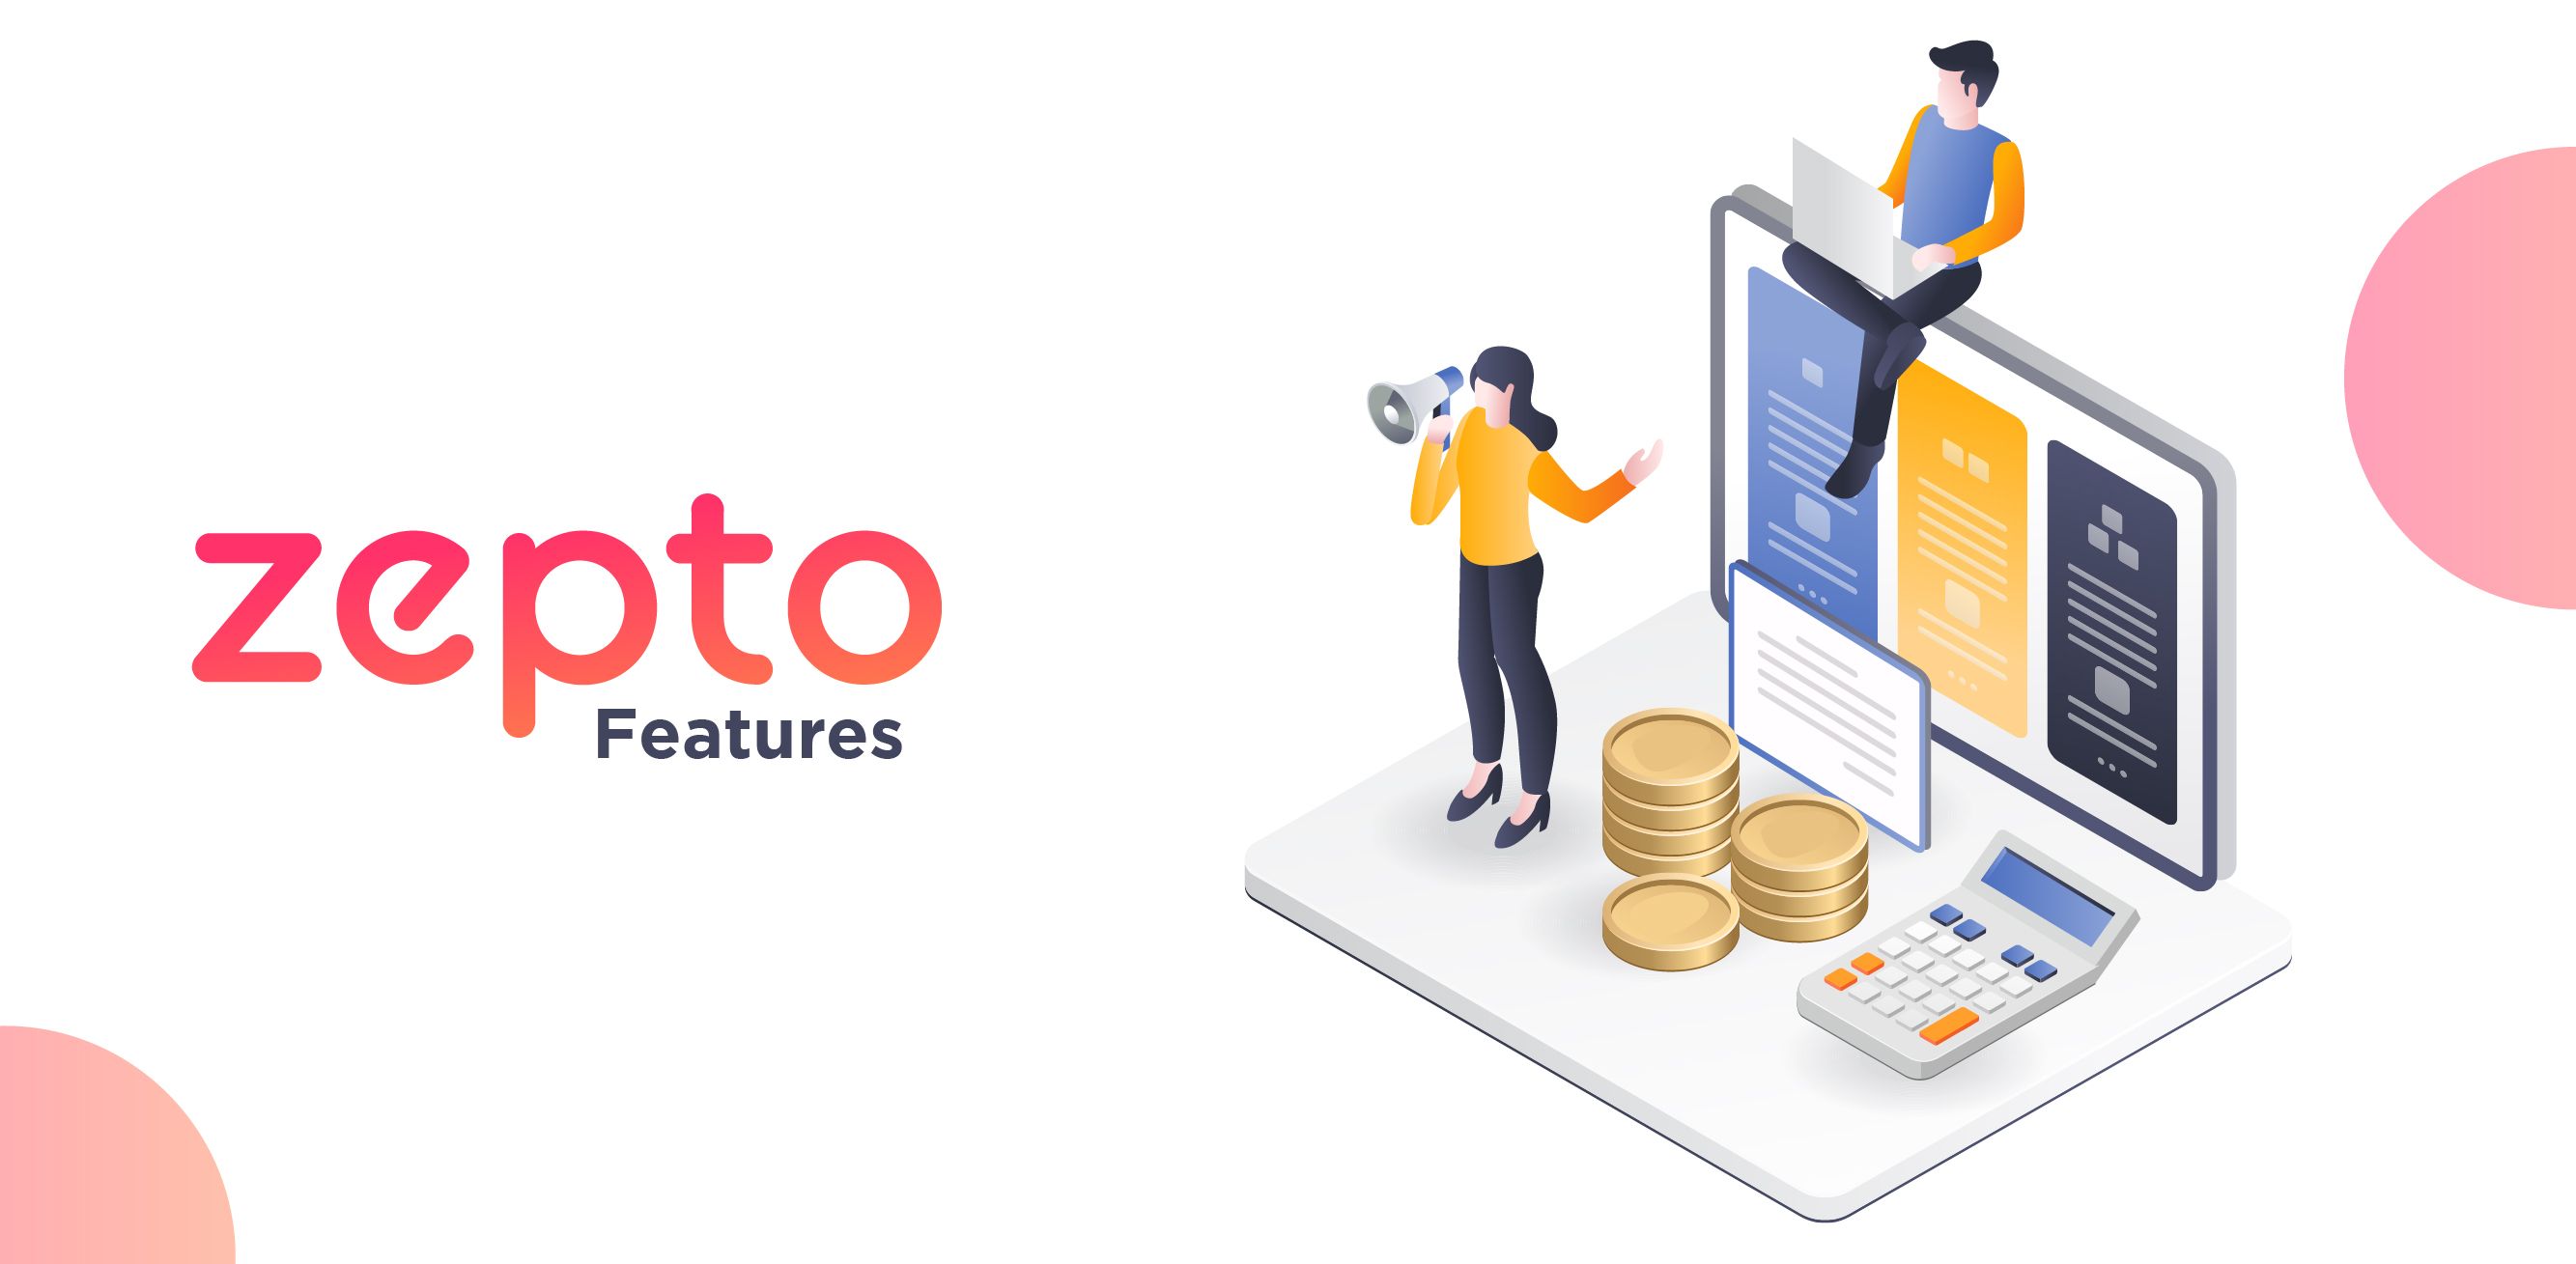 What are some attractive features Of the Zepto App?